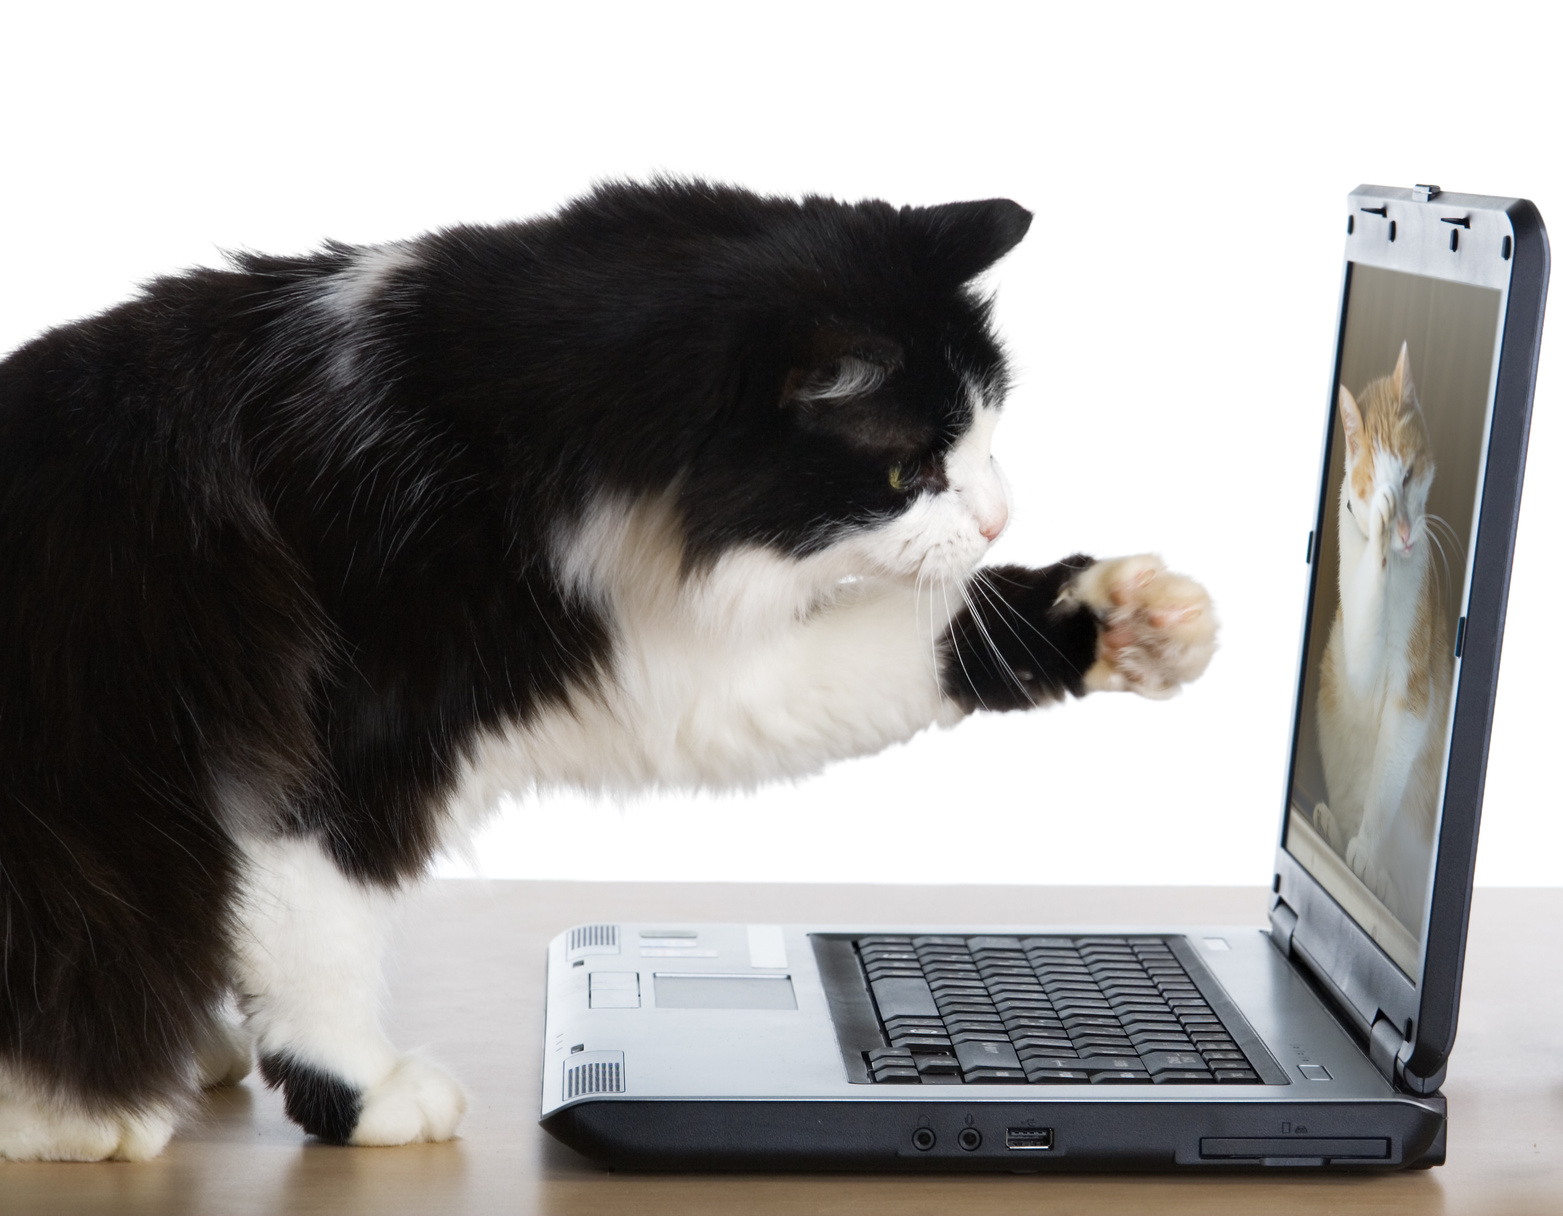 Cat pulls a paw to the laptop